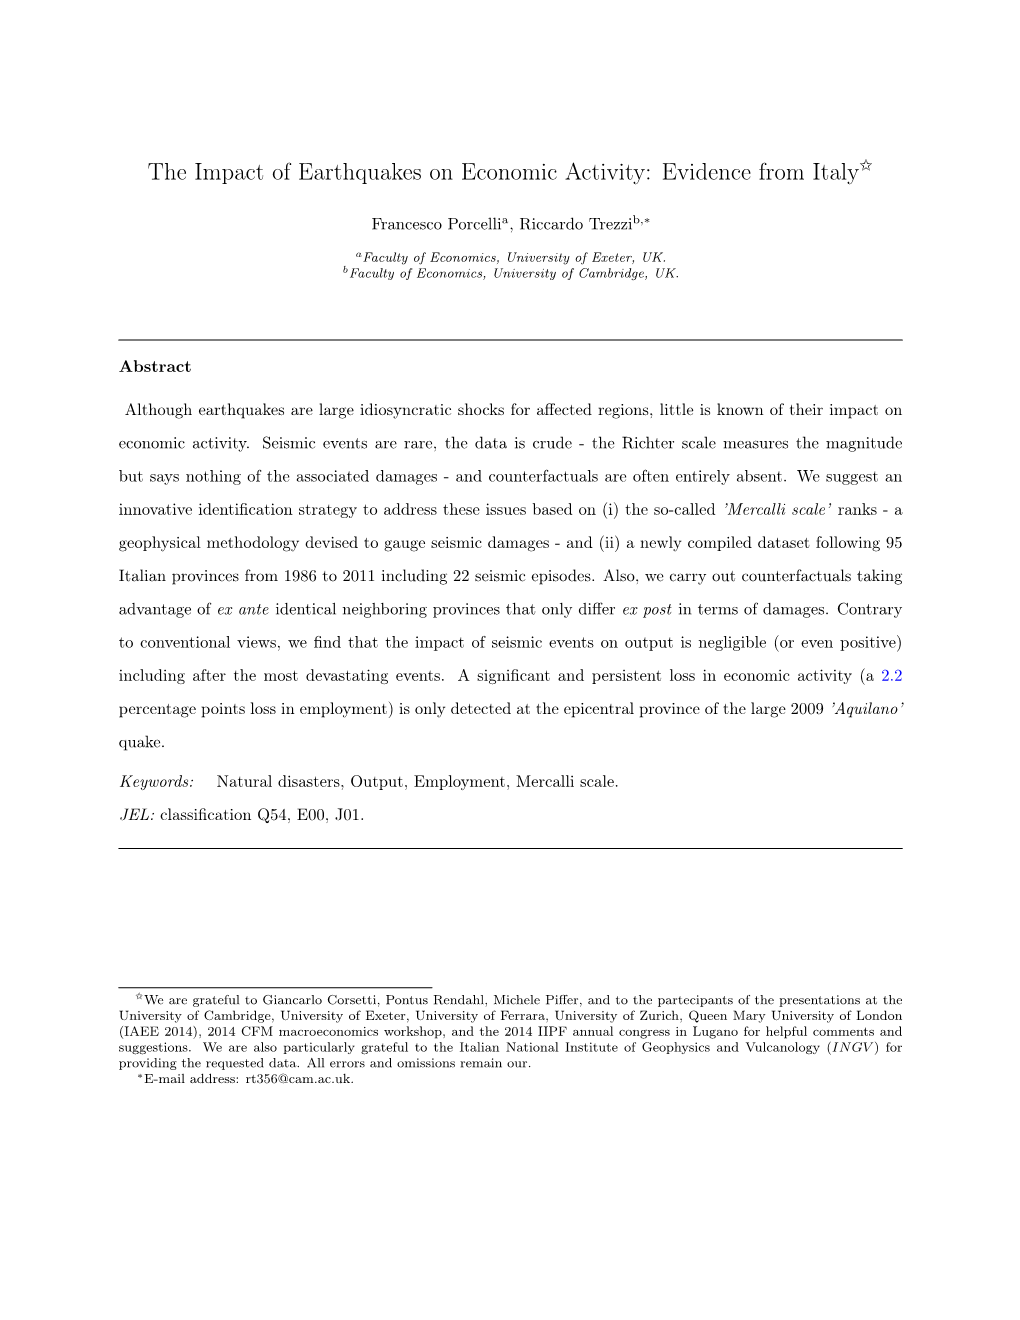 The Impact of Earthquakes on Economic Activity: Evidence from Italy$